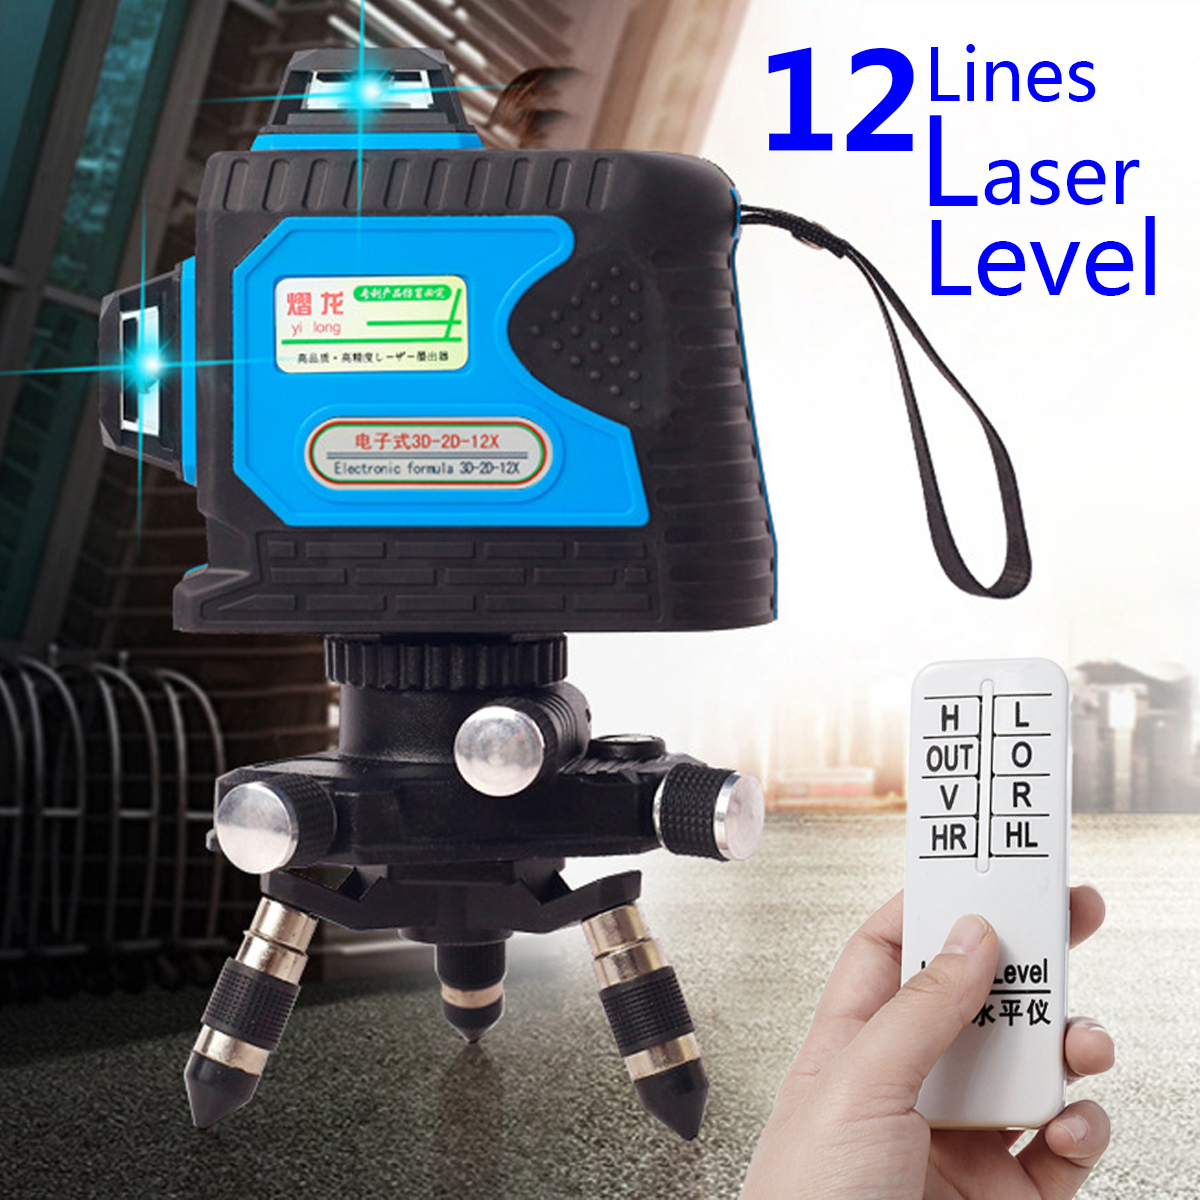 12-Lines-3D-360deg-Waterproof-Level-Precision-Self-Leveling-and--Remote-Control-1636272-1